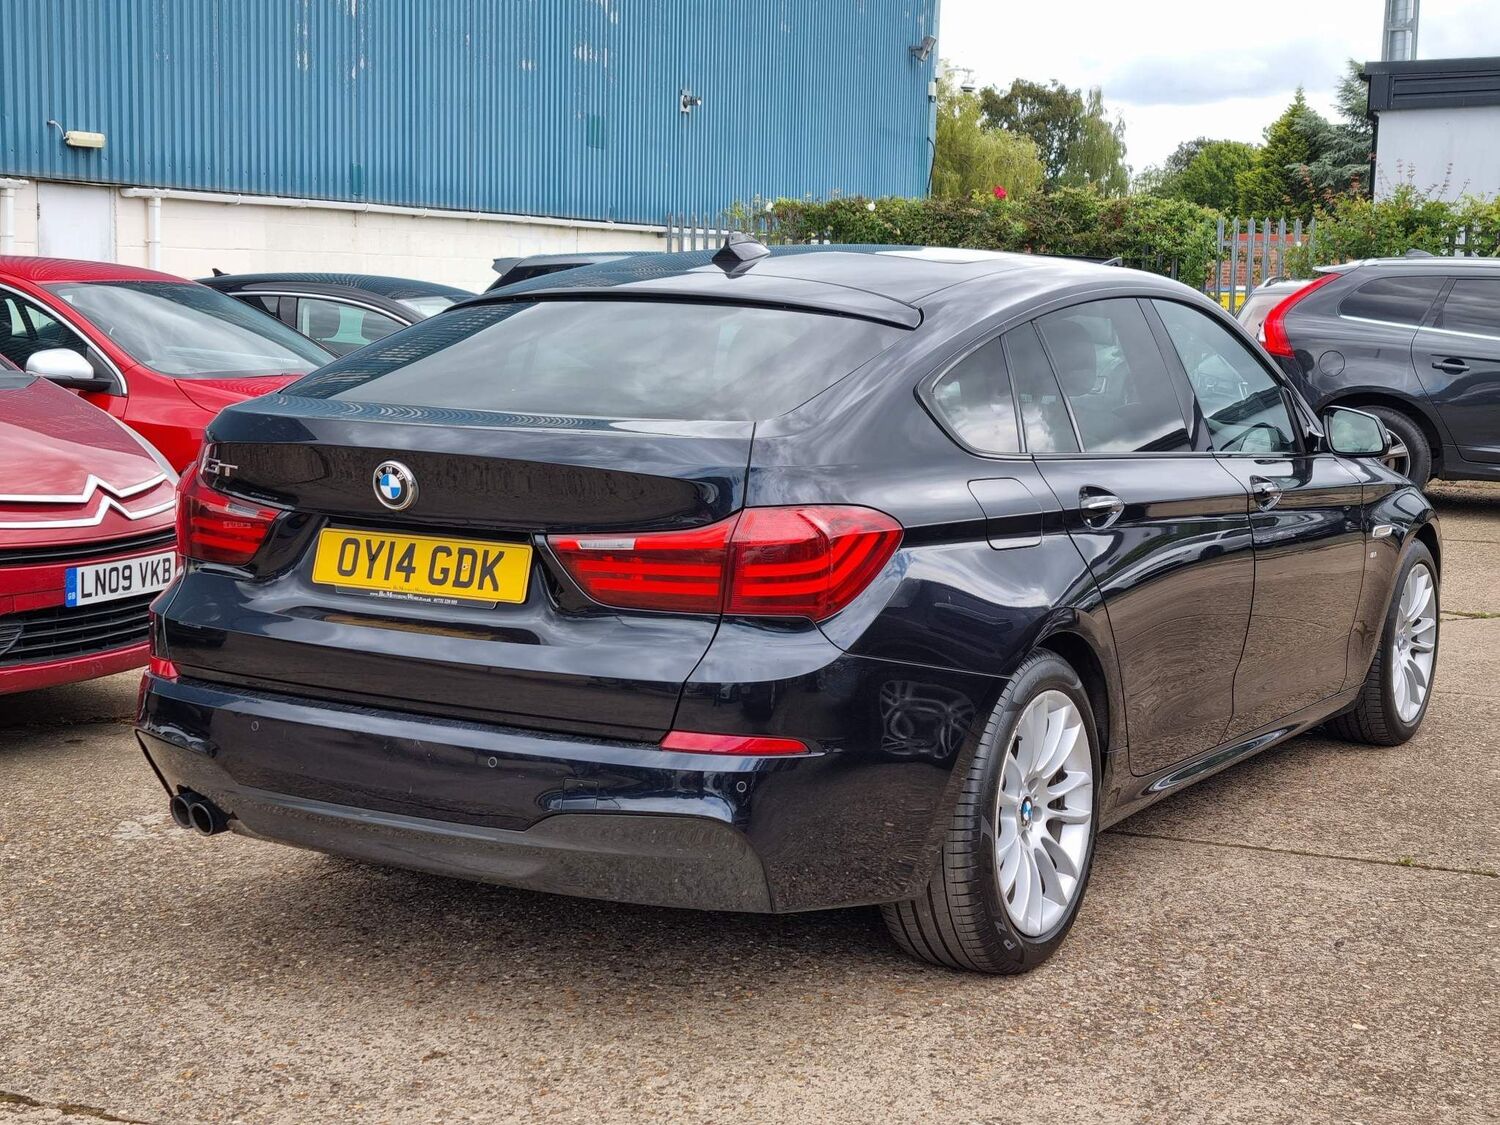 Used BMW 5 SERIES in Peterborough, Northamptionshire